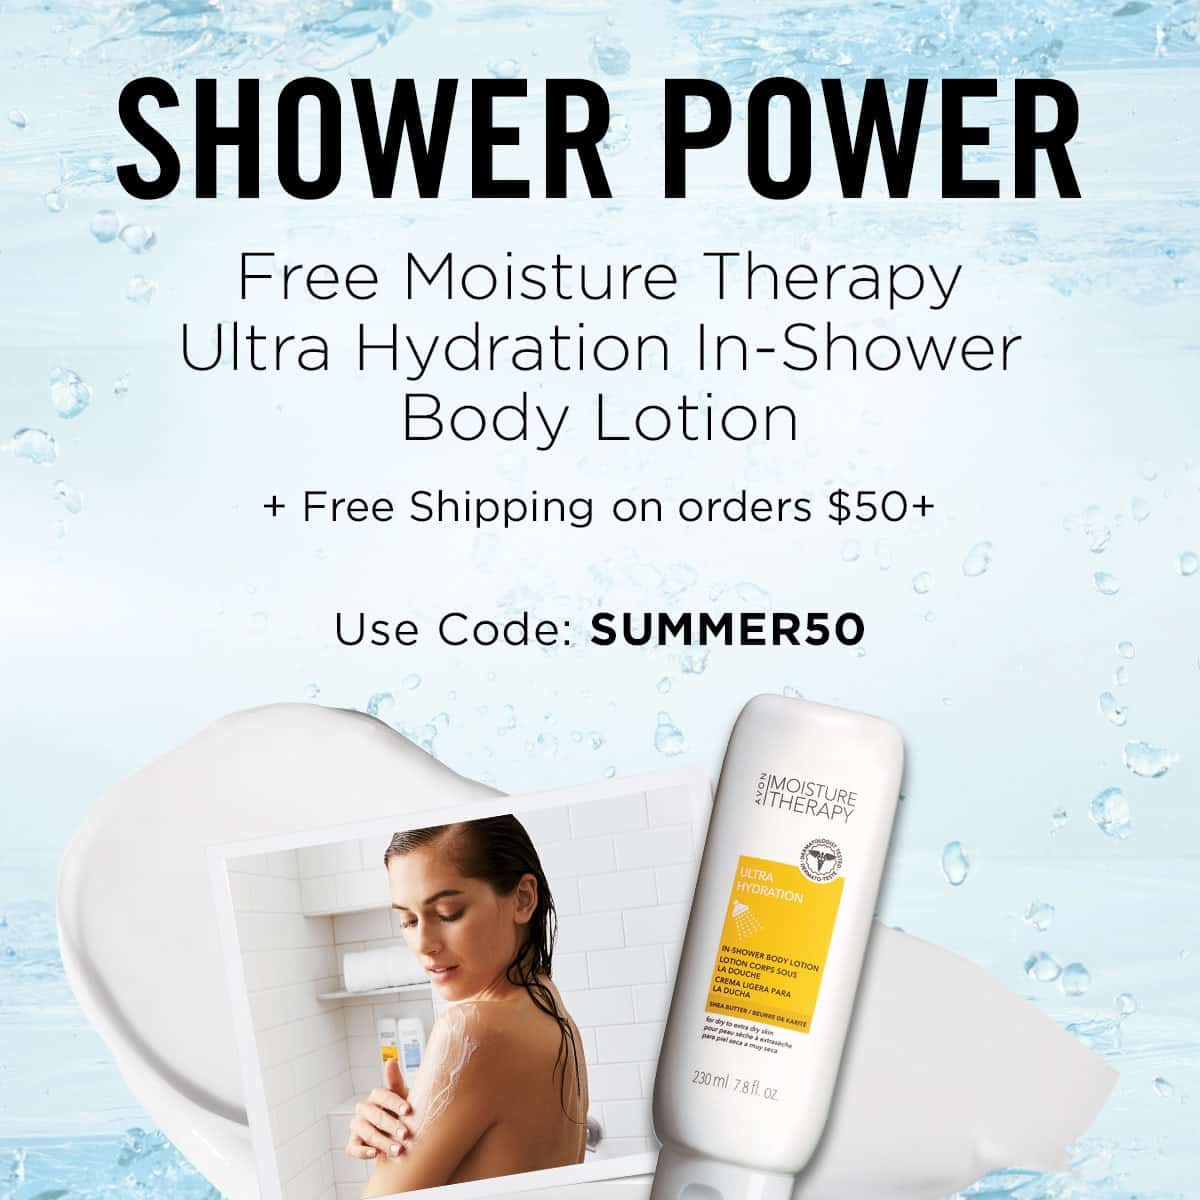 Avon free gift with purchase